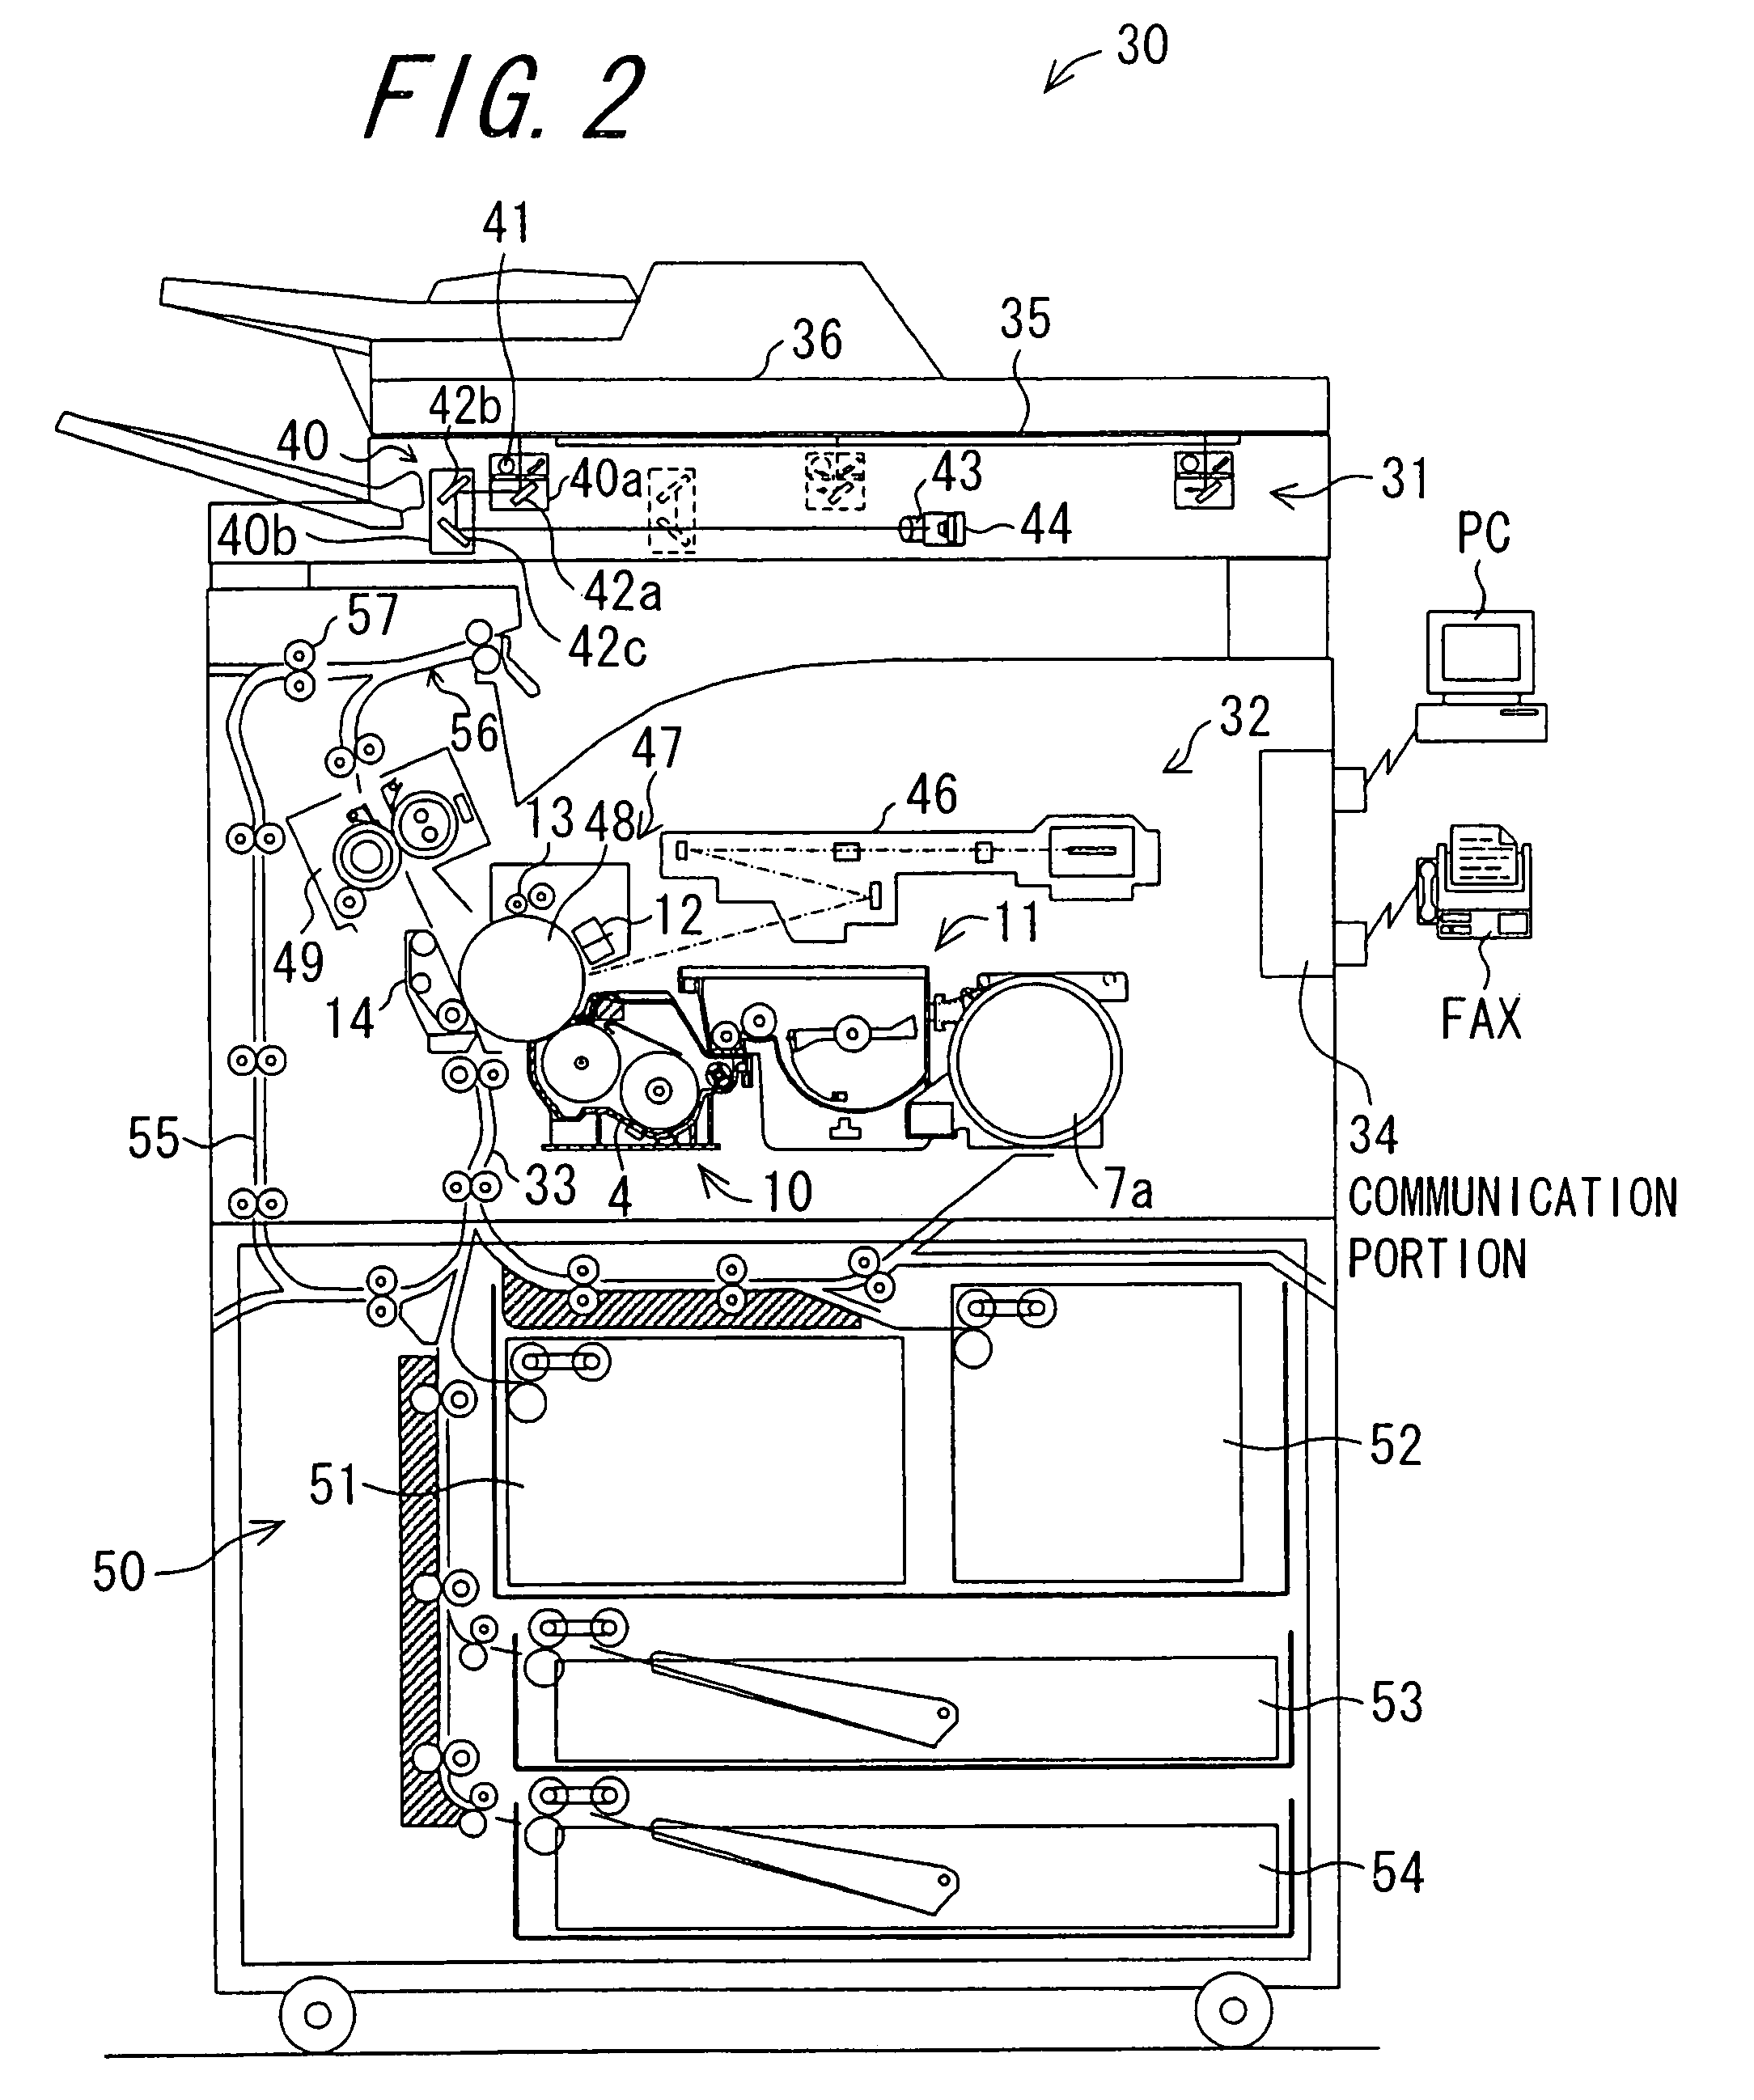 Toner replenishing device and image forming apparatus having the same